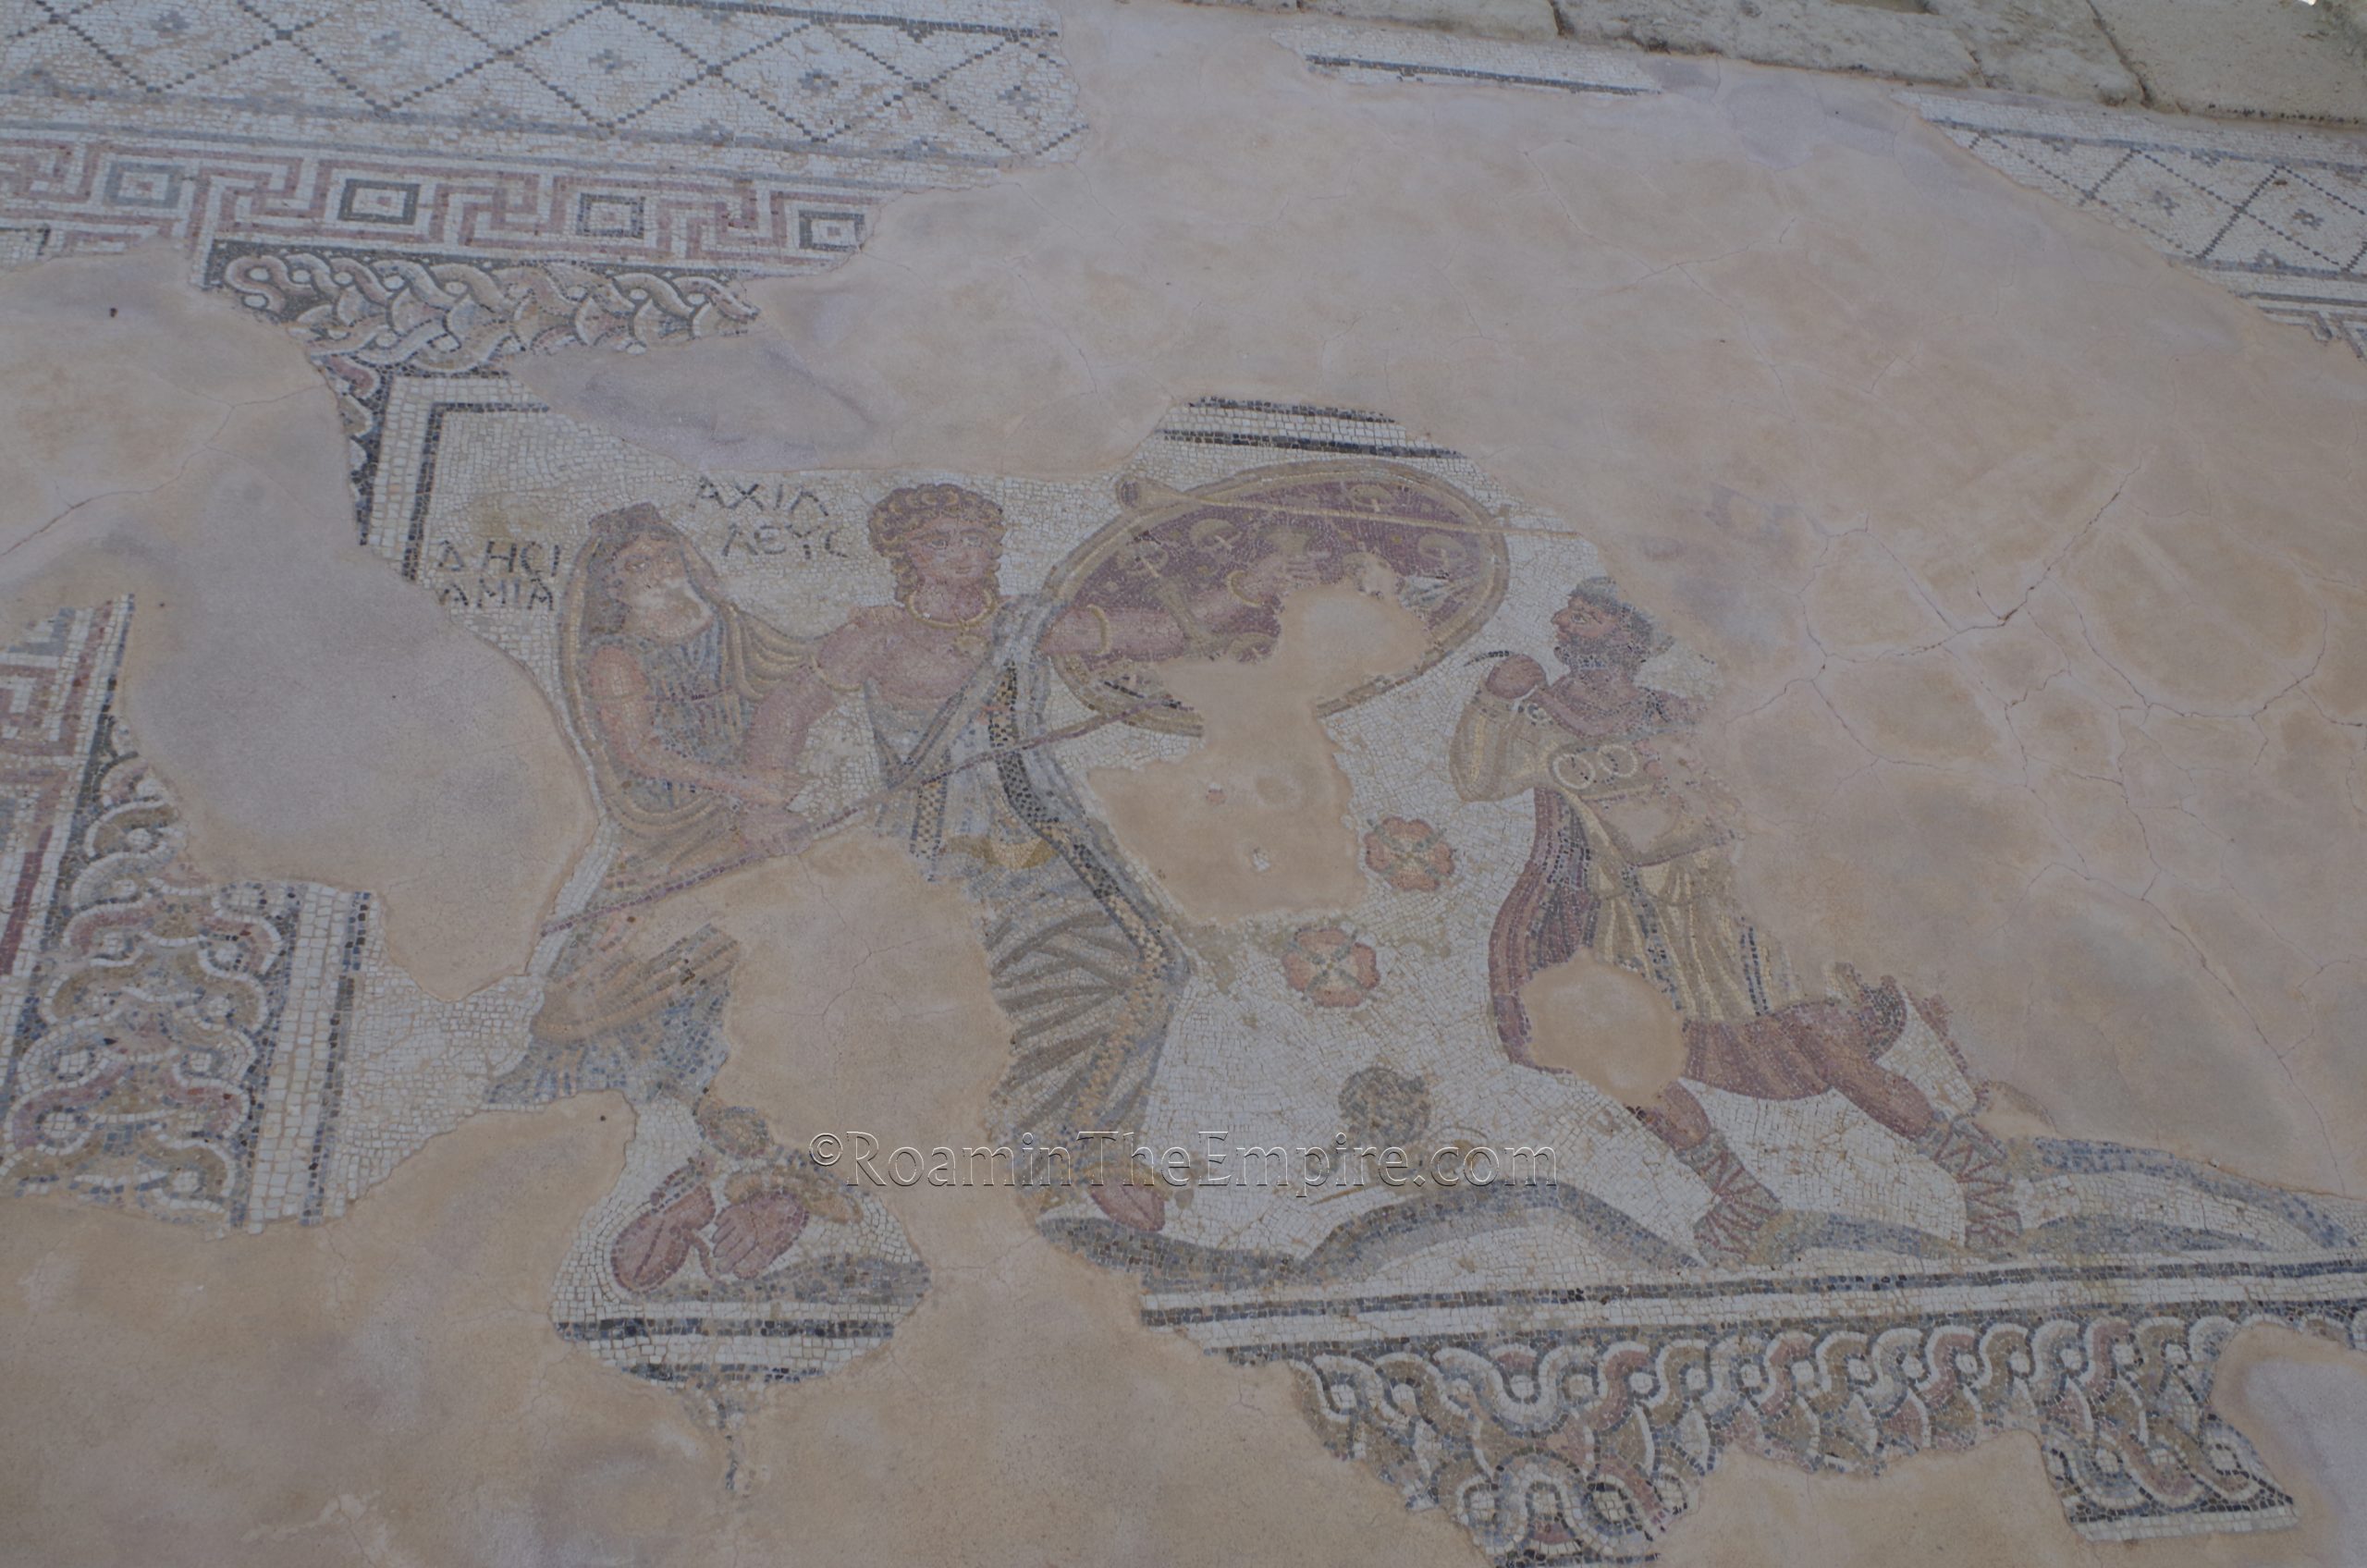 Mosaic from the House of Achilles depicting Achilles being discovered hiding as a woman by Odysseus at the court of Lycomedes on Skyros. Curium.